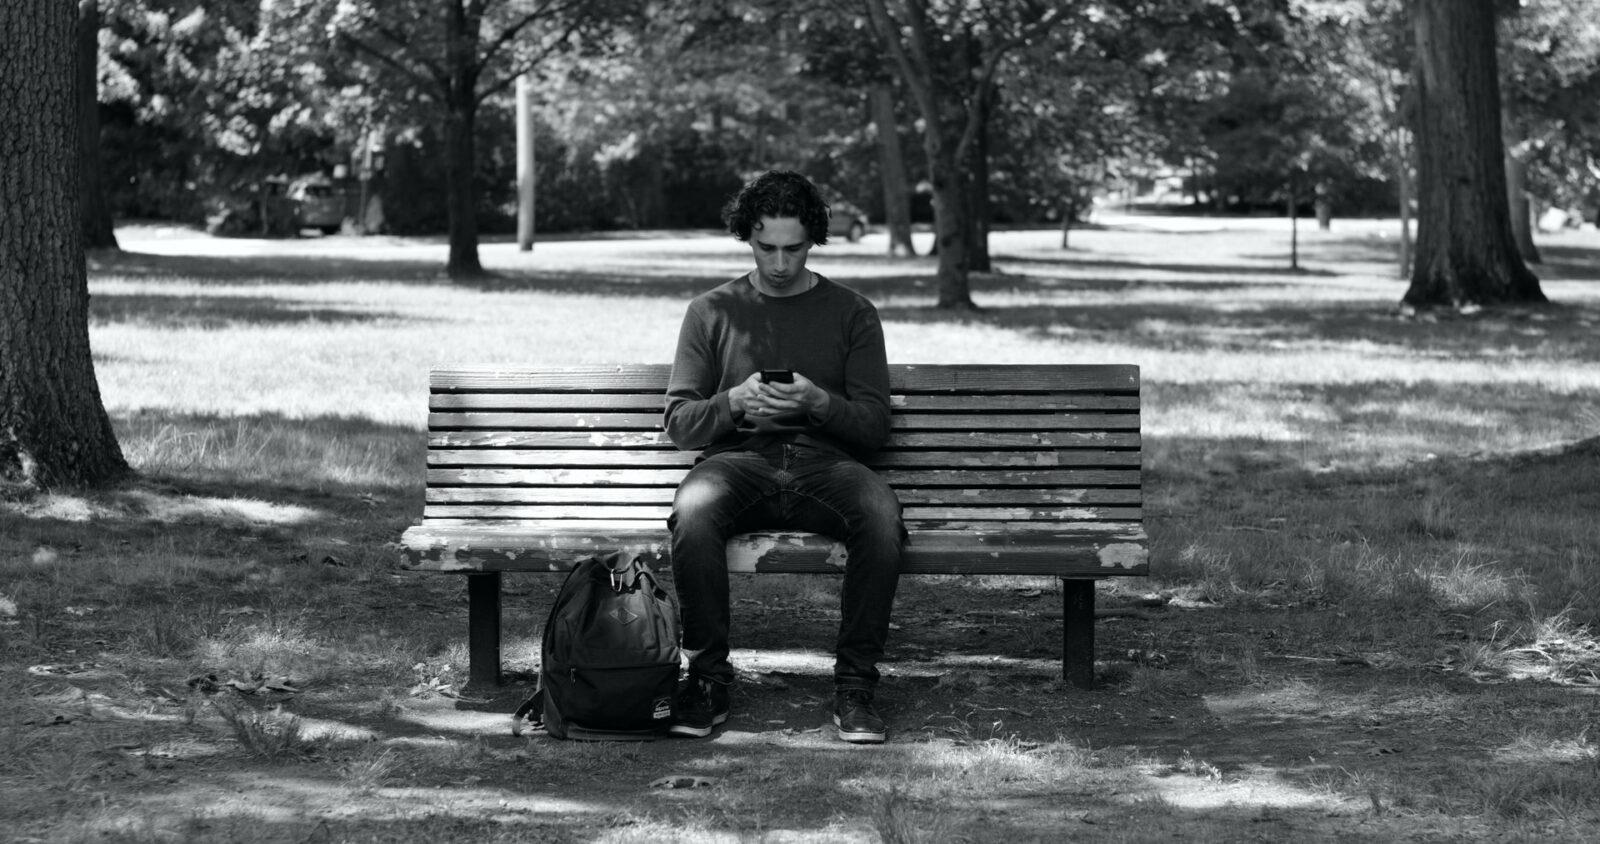 A man sitting on the bench looking at his phone.